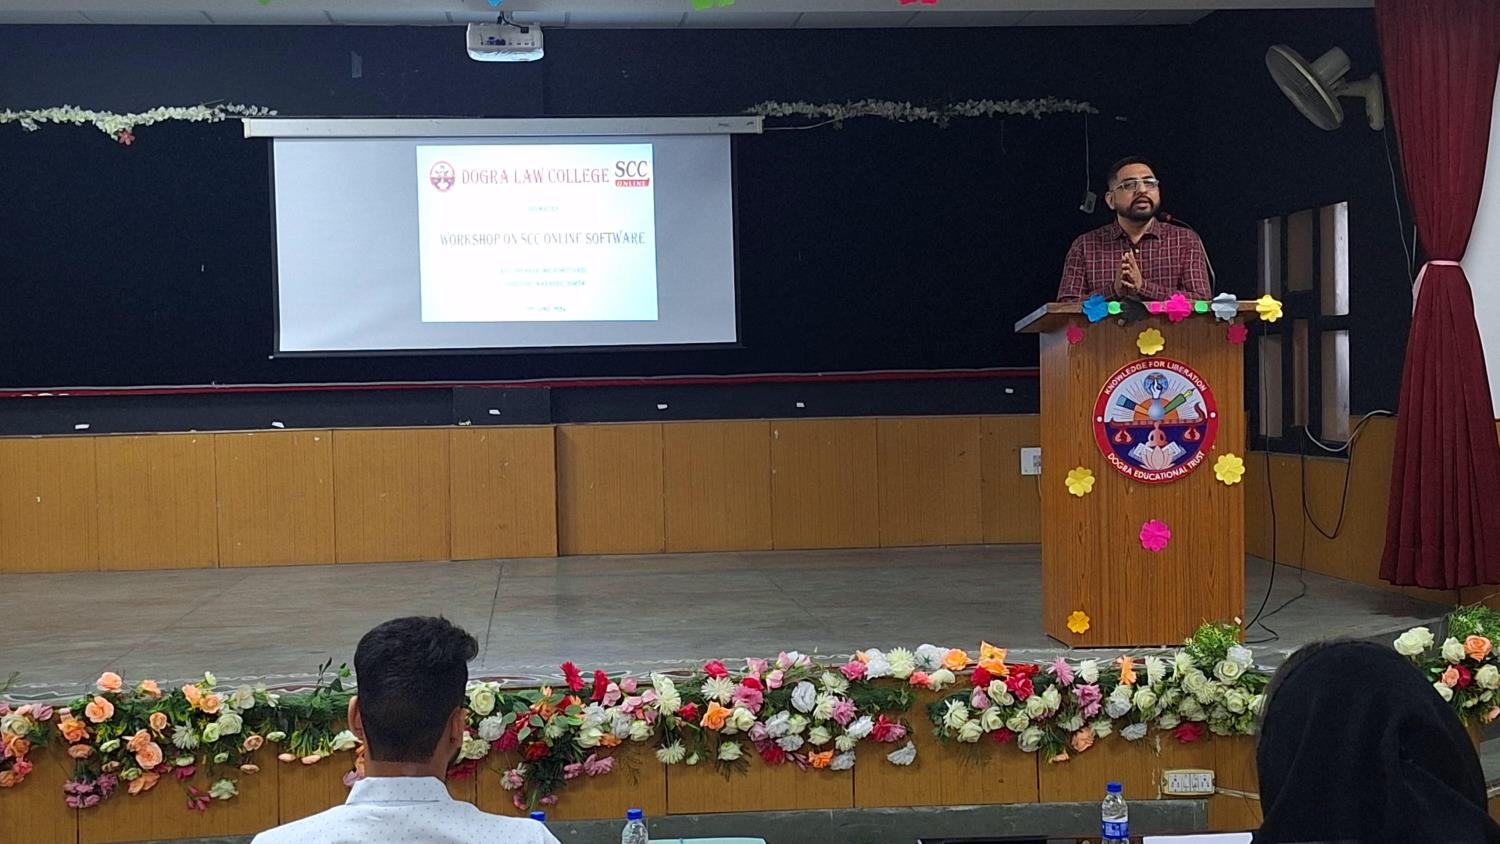 Dogra Law College is proud to have hosted an insightful workshop on SCC ONLINE SOFTWARE,